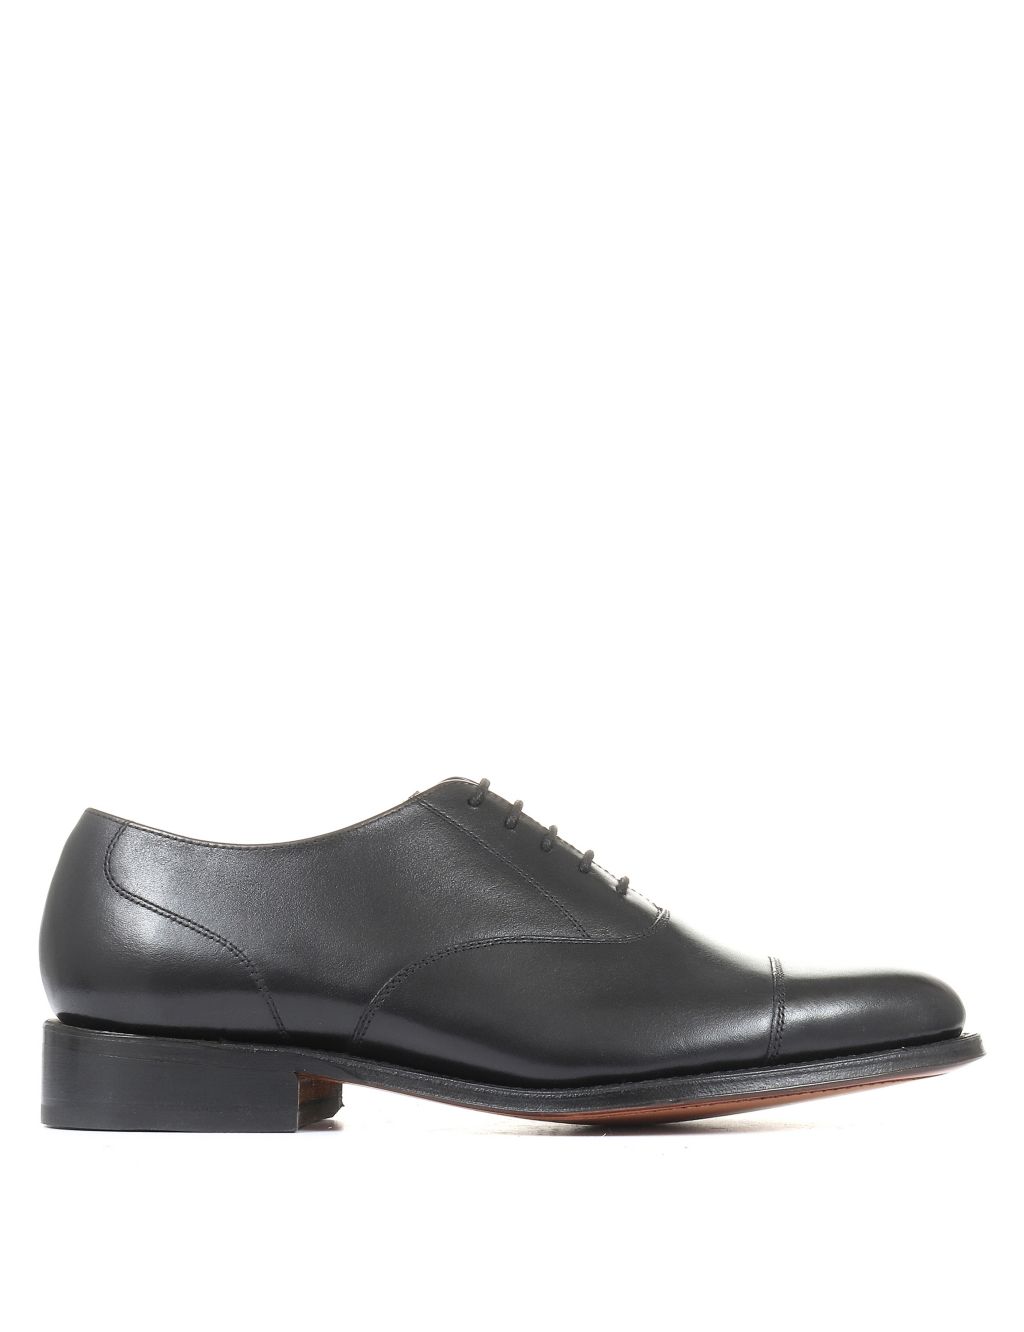 Leather Goodyear Welted Oxford Shoes image 2